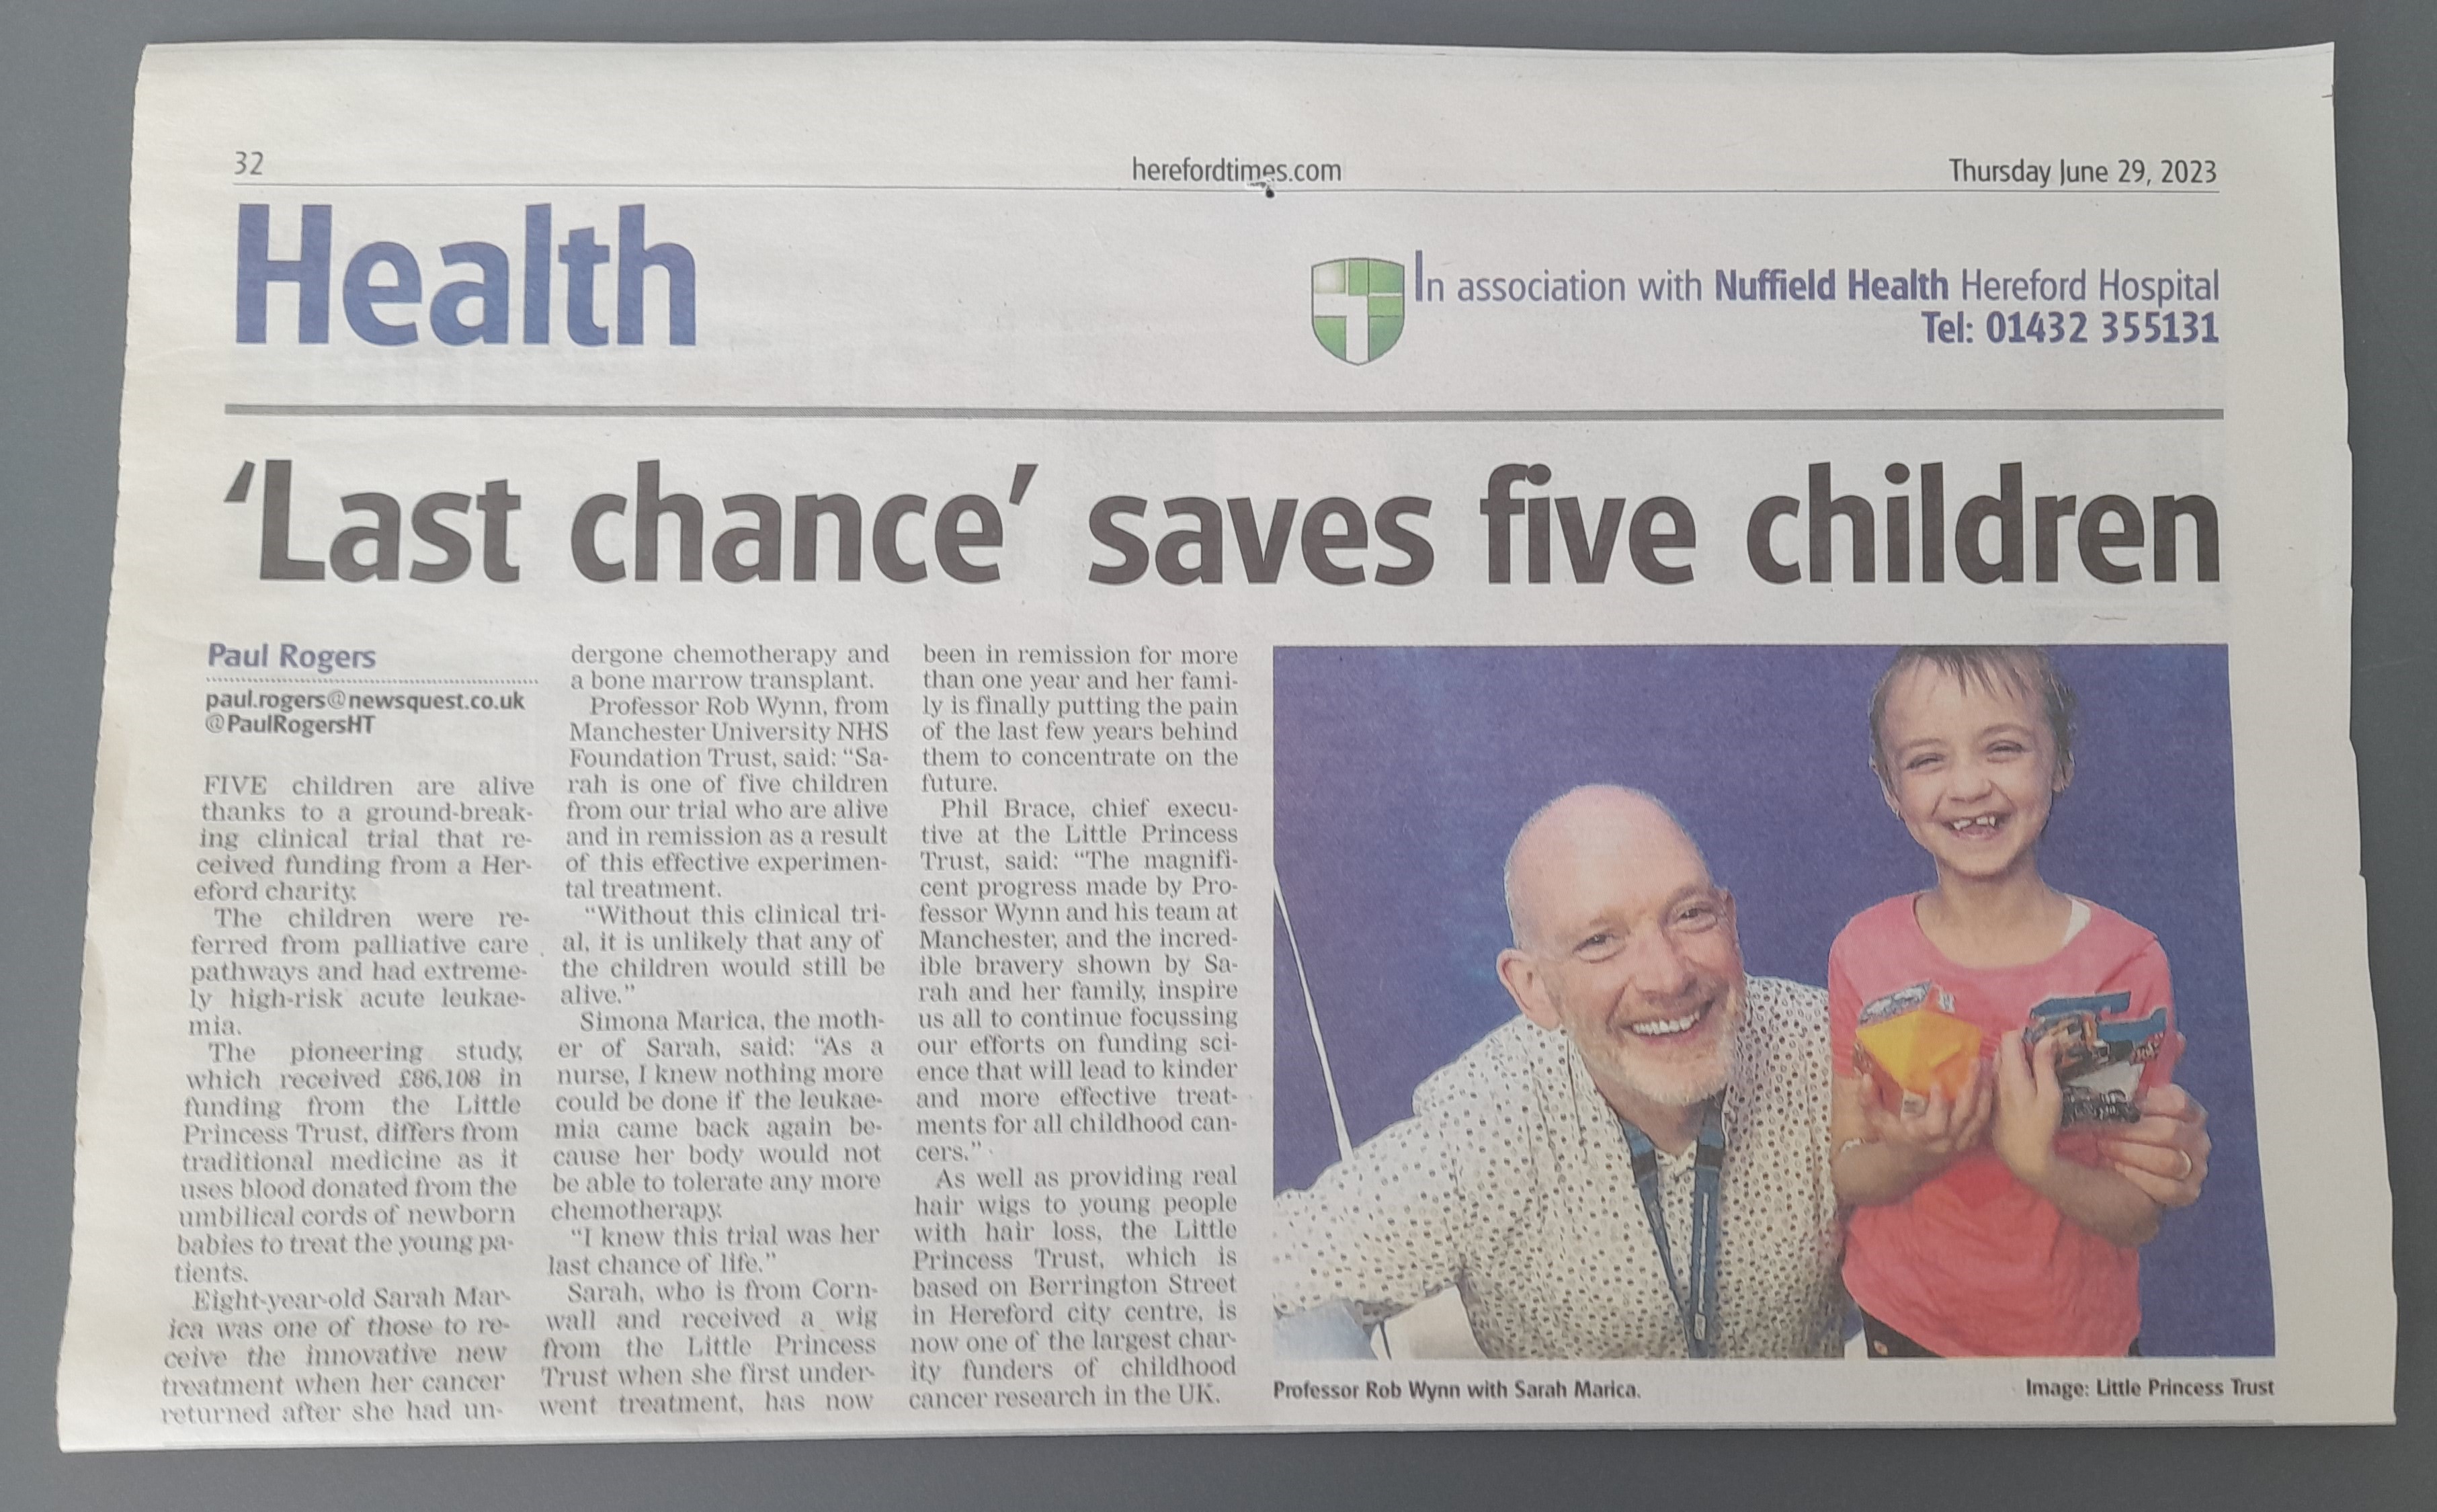 The Little Princess Trust's funding of childhood cancer research has made great results - and headlines.